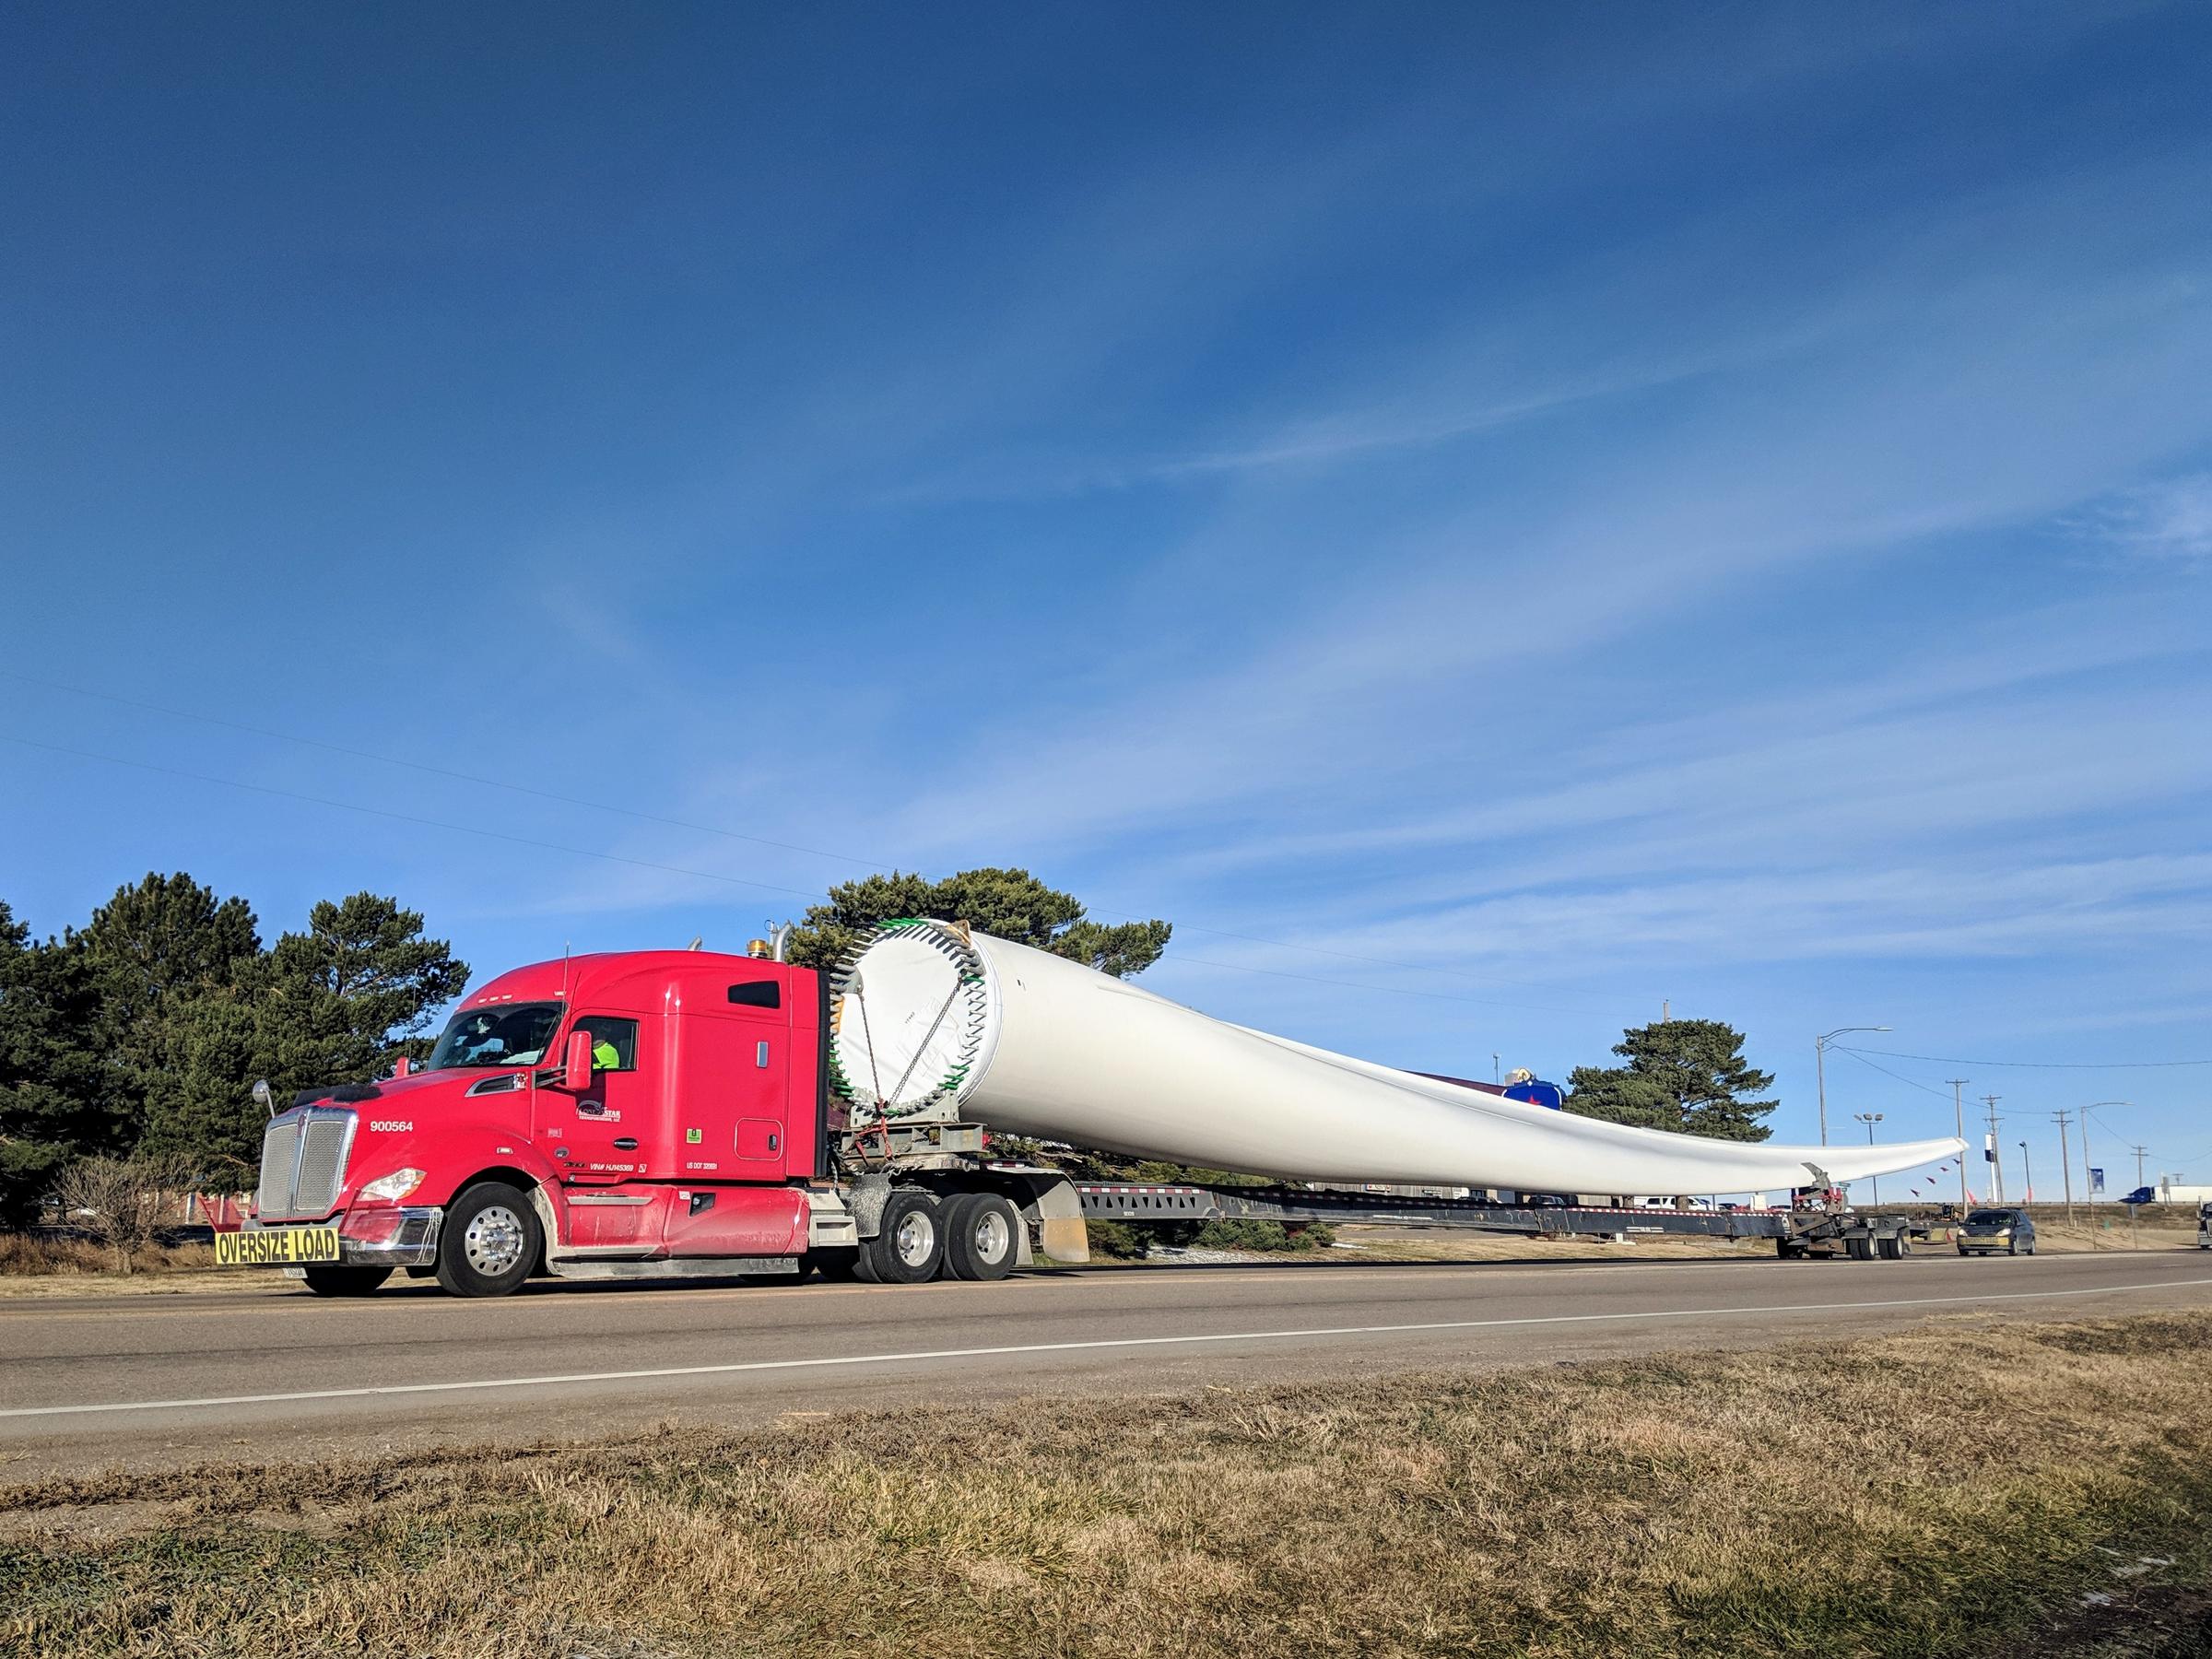 a truck carries a very long wind turbine on its bed